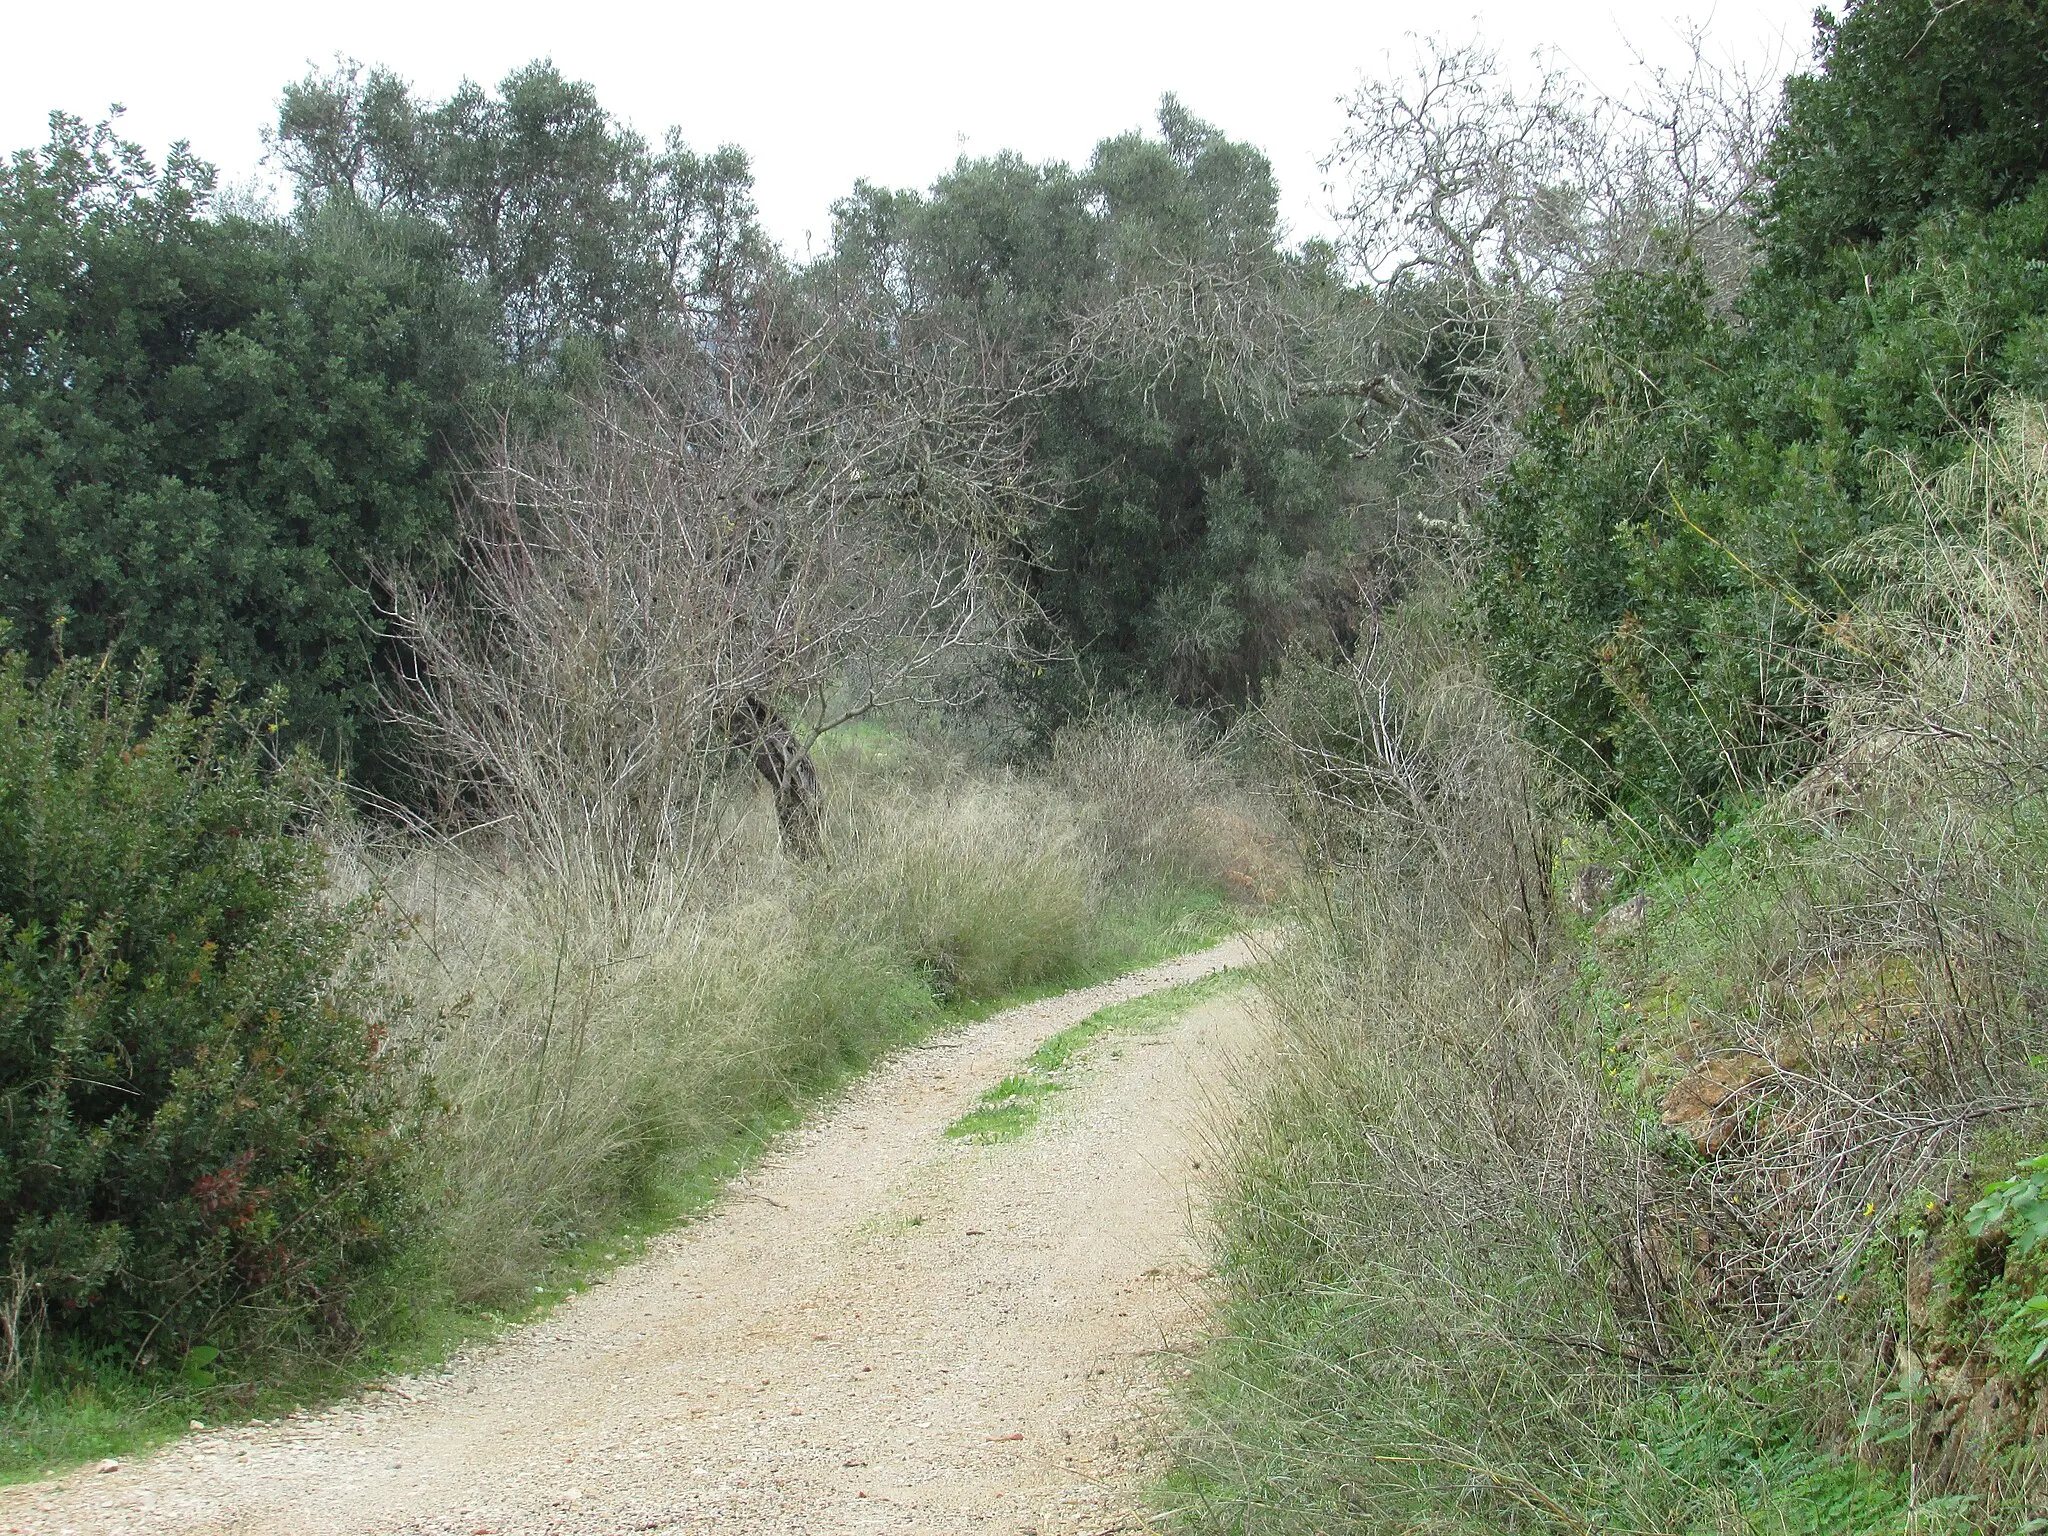 Photo showing: Looking east along an unpaved section of the Caminho Quinta da Bolota in the city of Albufeira, Algarve, Portugal.